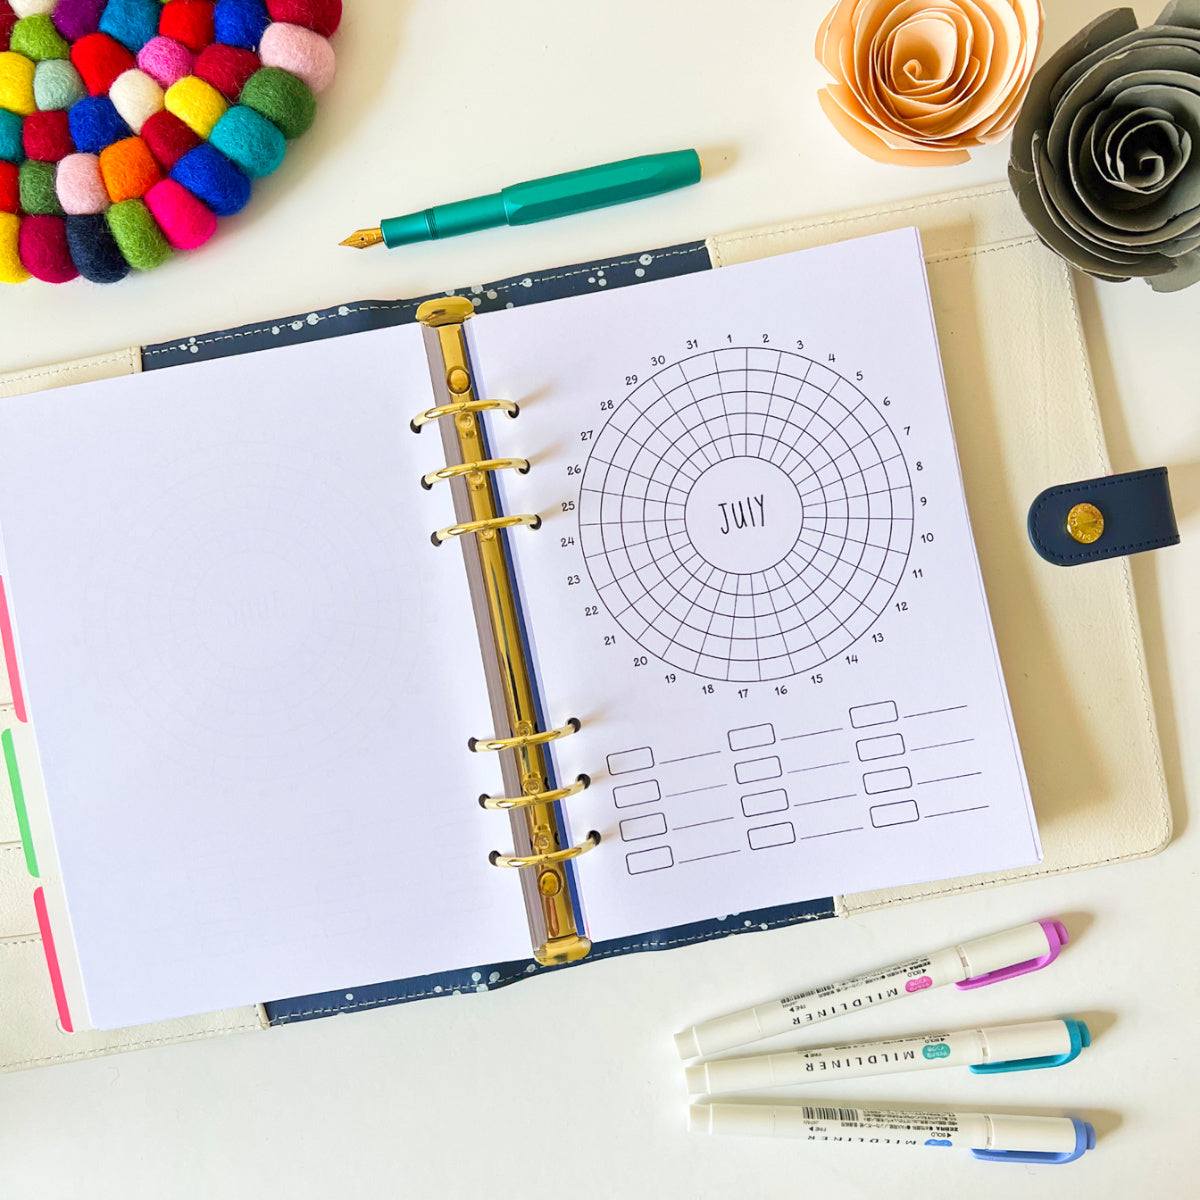 An open Monthly Habit Tracker lies on a table, displaying a circular July calendar spread and a section for tasks and goal setting. Surrounding the tracker are colorful markers, a green pen, and decorative items including a multicolored pom-pom coaster and paper flowers.